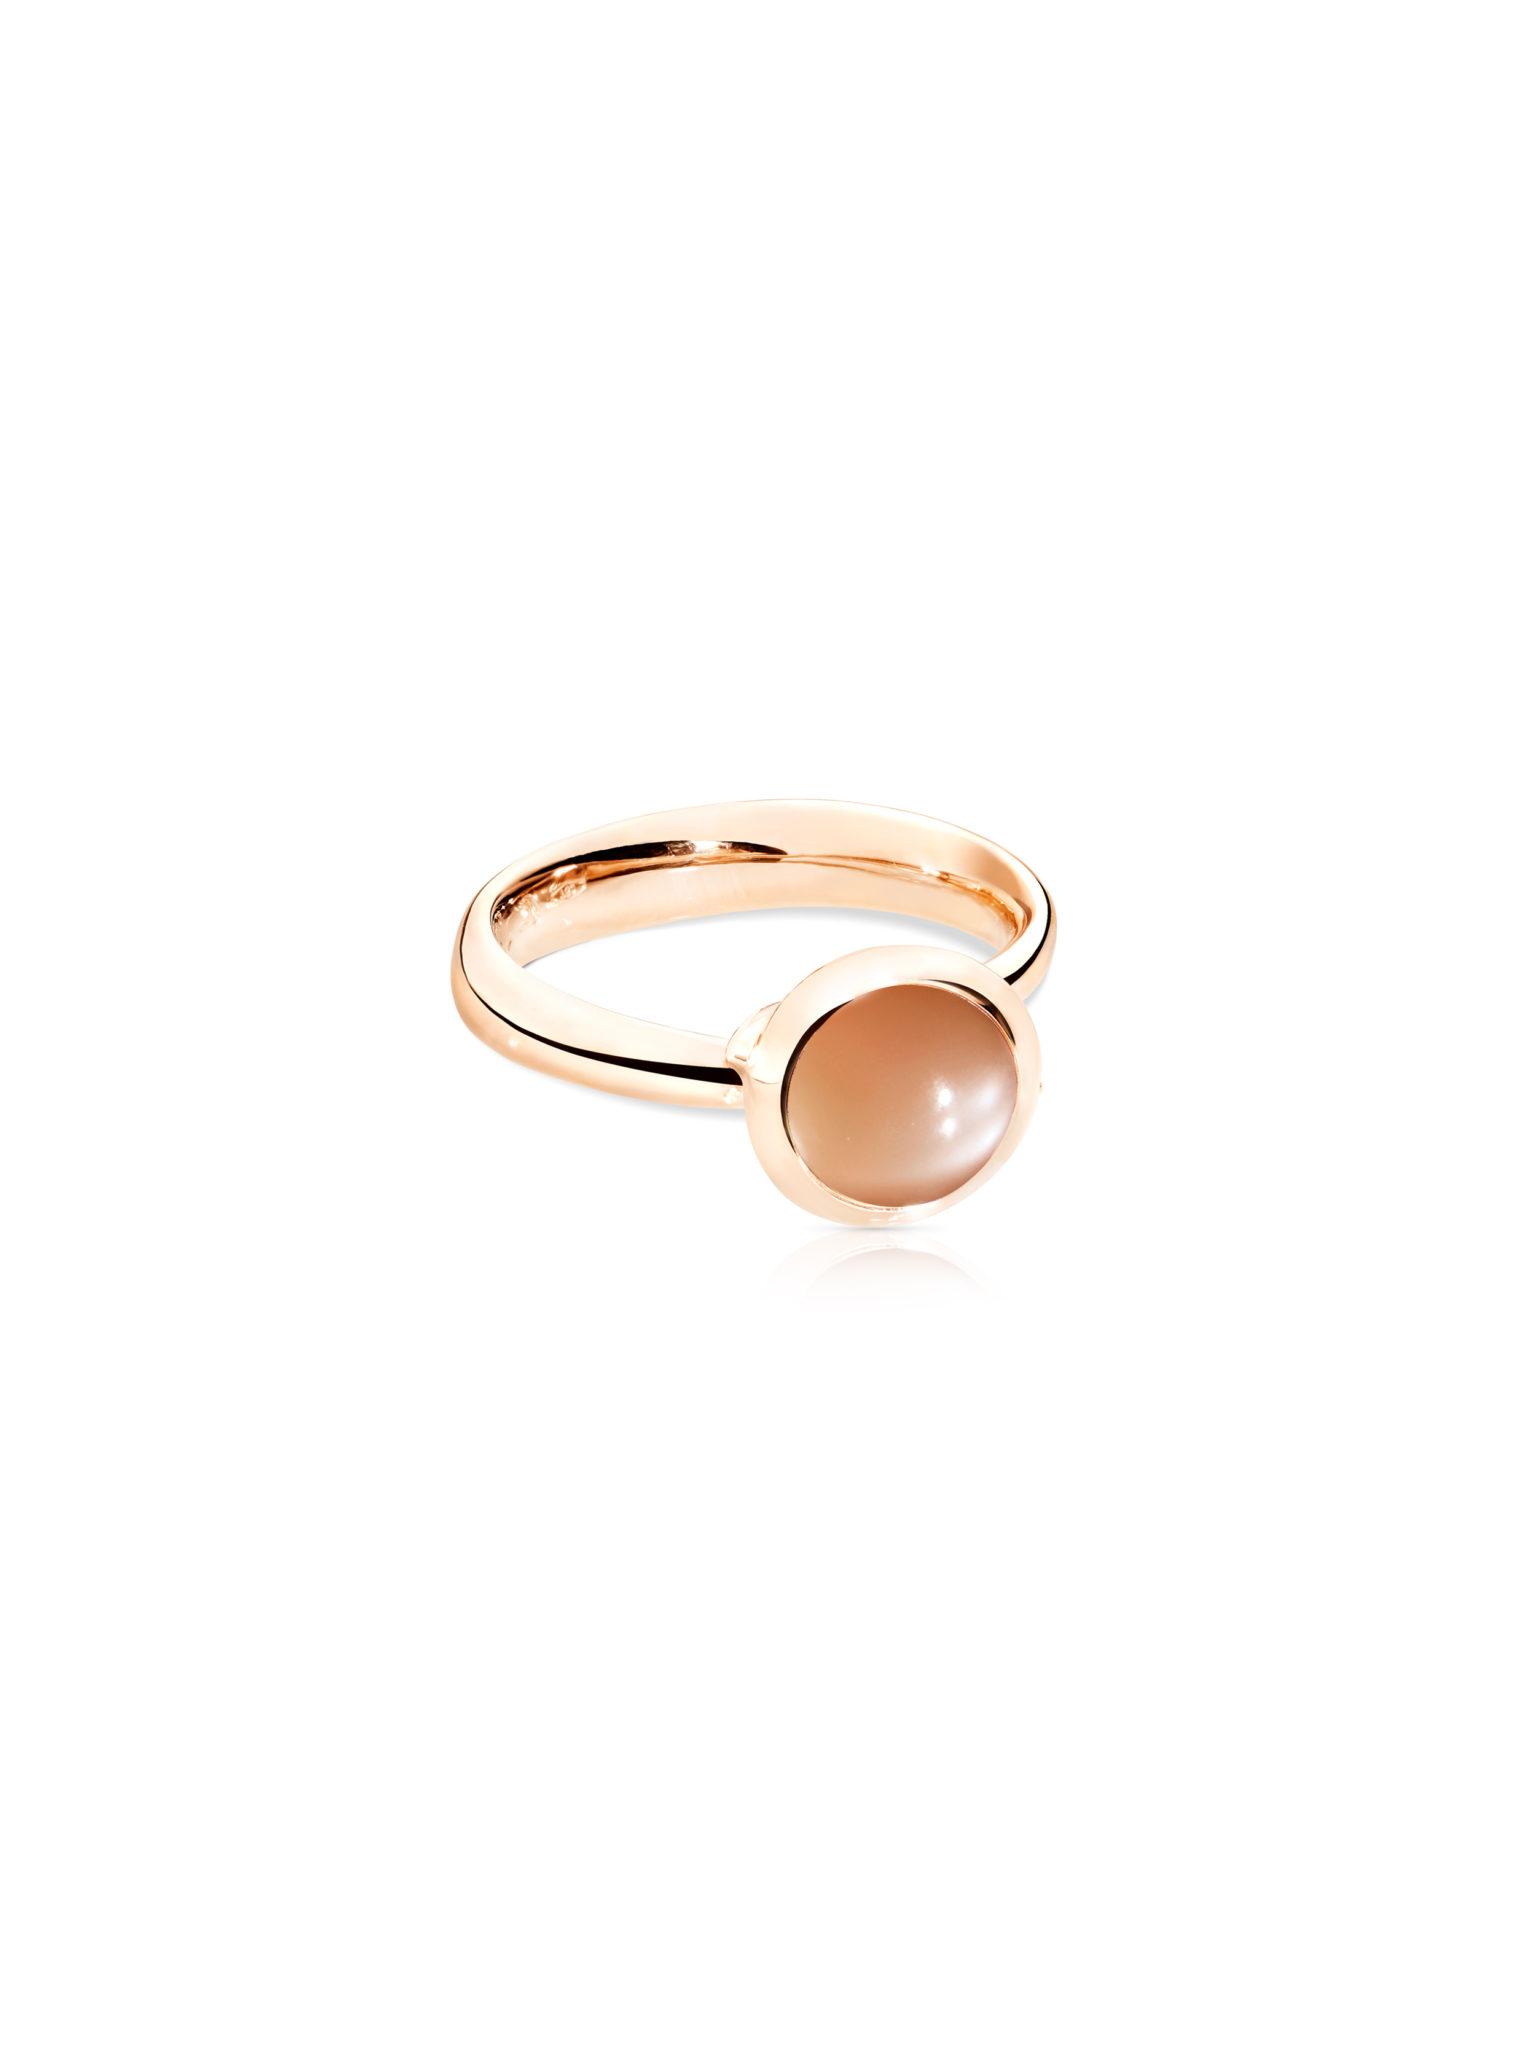 BOUTON ring small brown MoonstoneBOUTON Ring small Brauner Mondstein